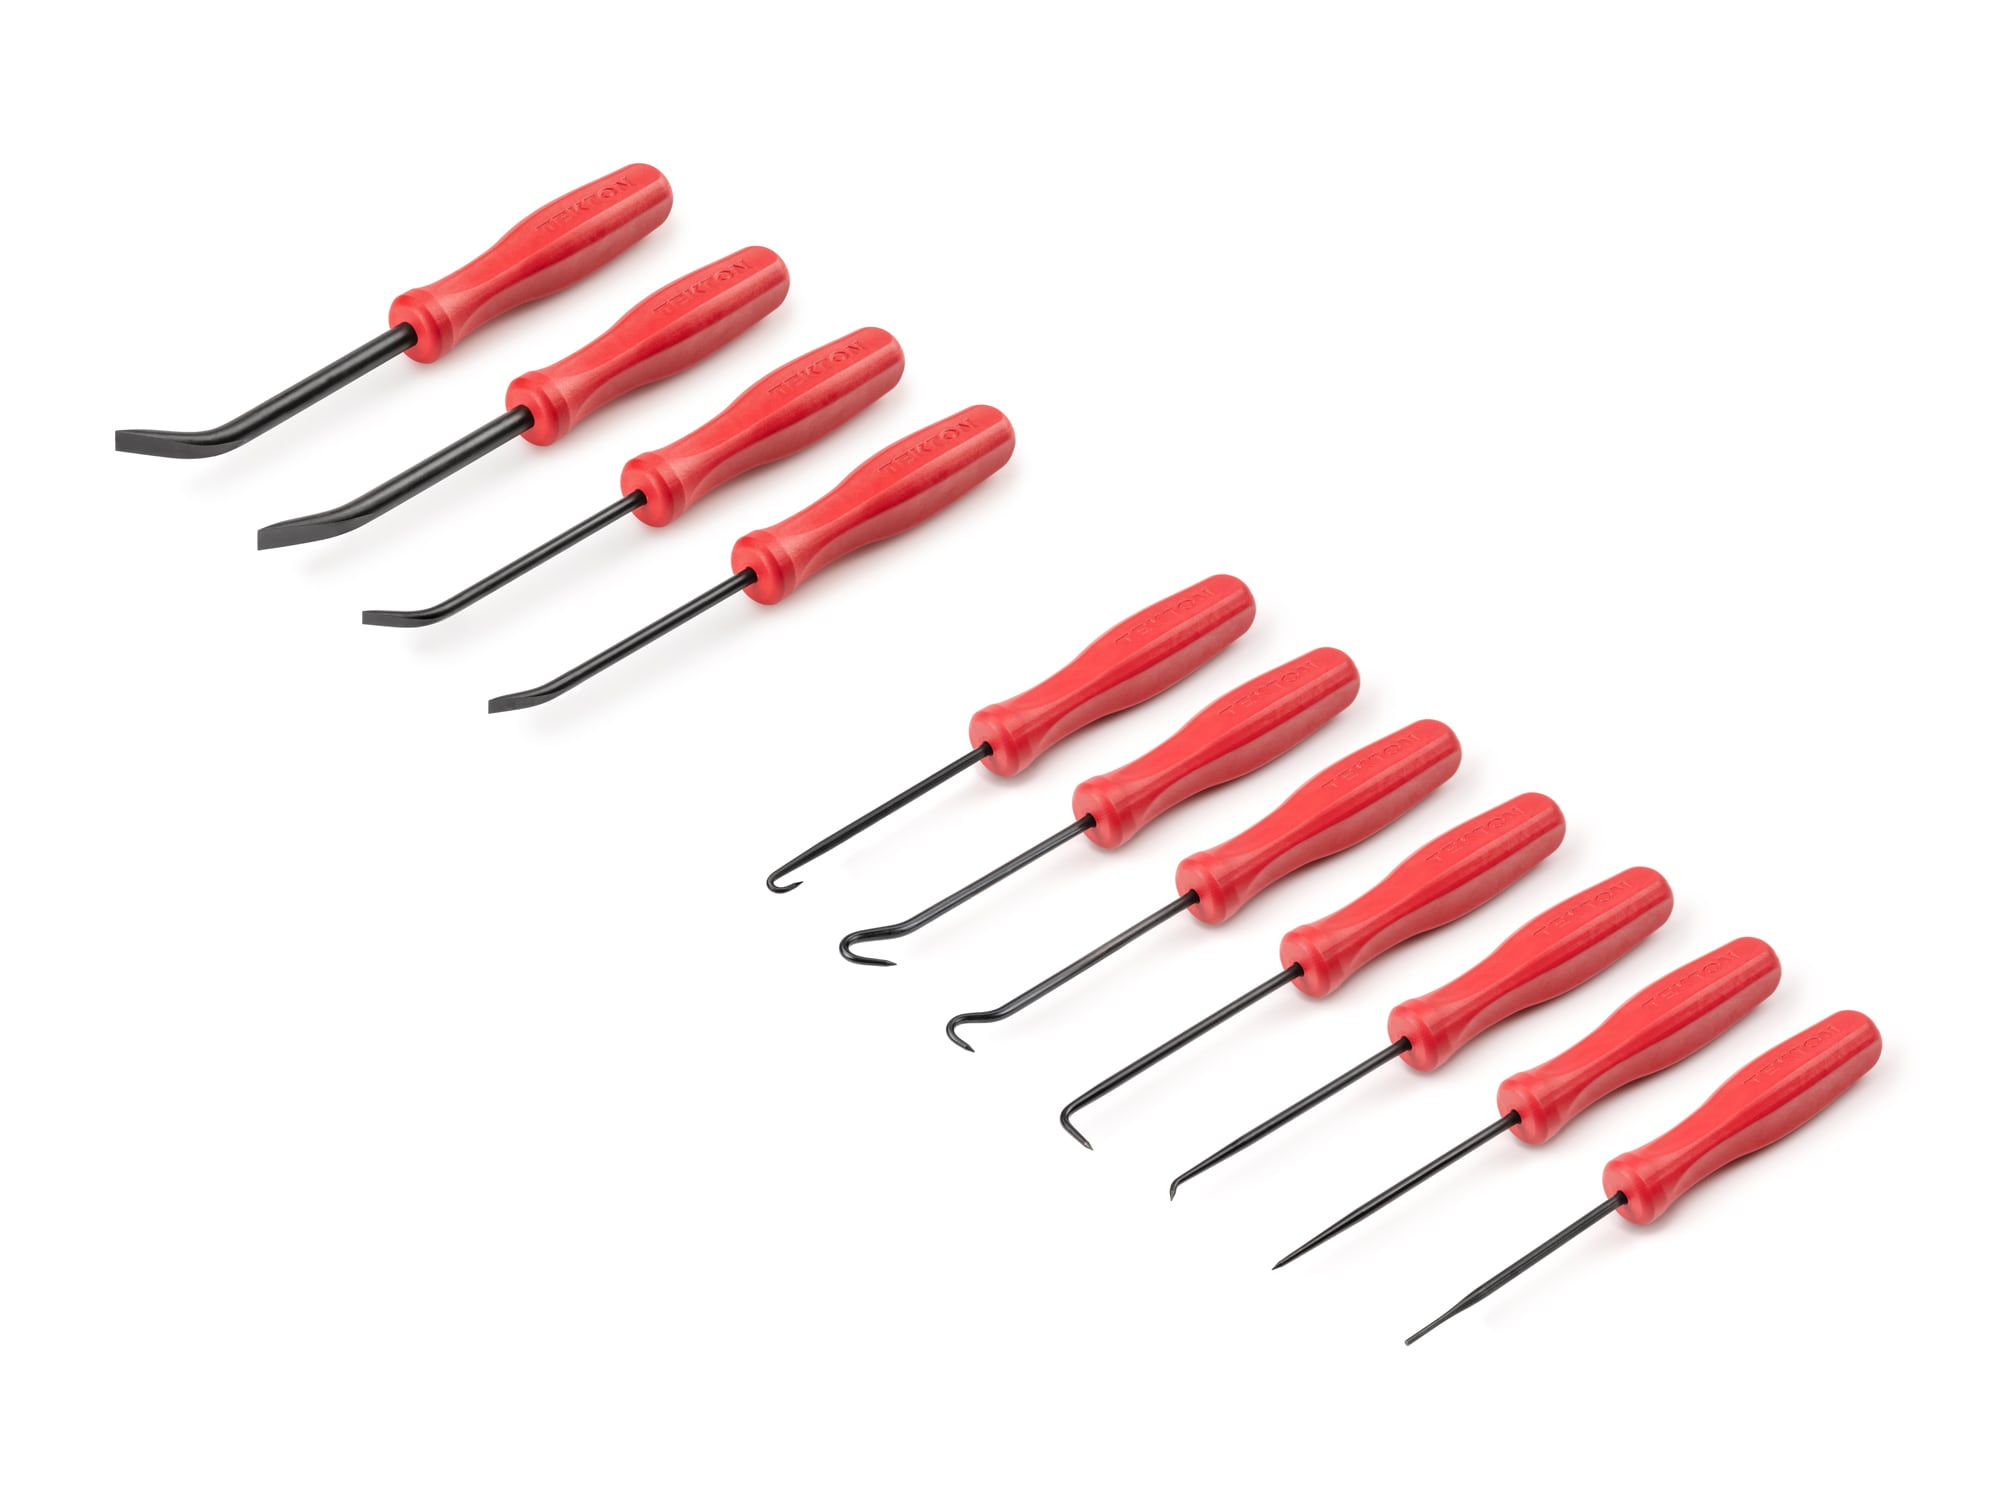 ROTATION Precision Hook and Pick Set for Automotive